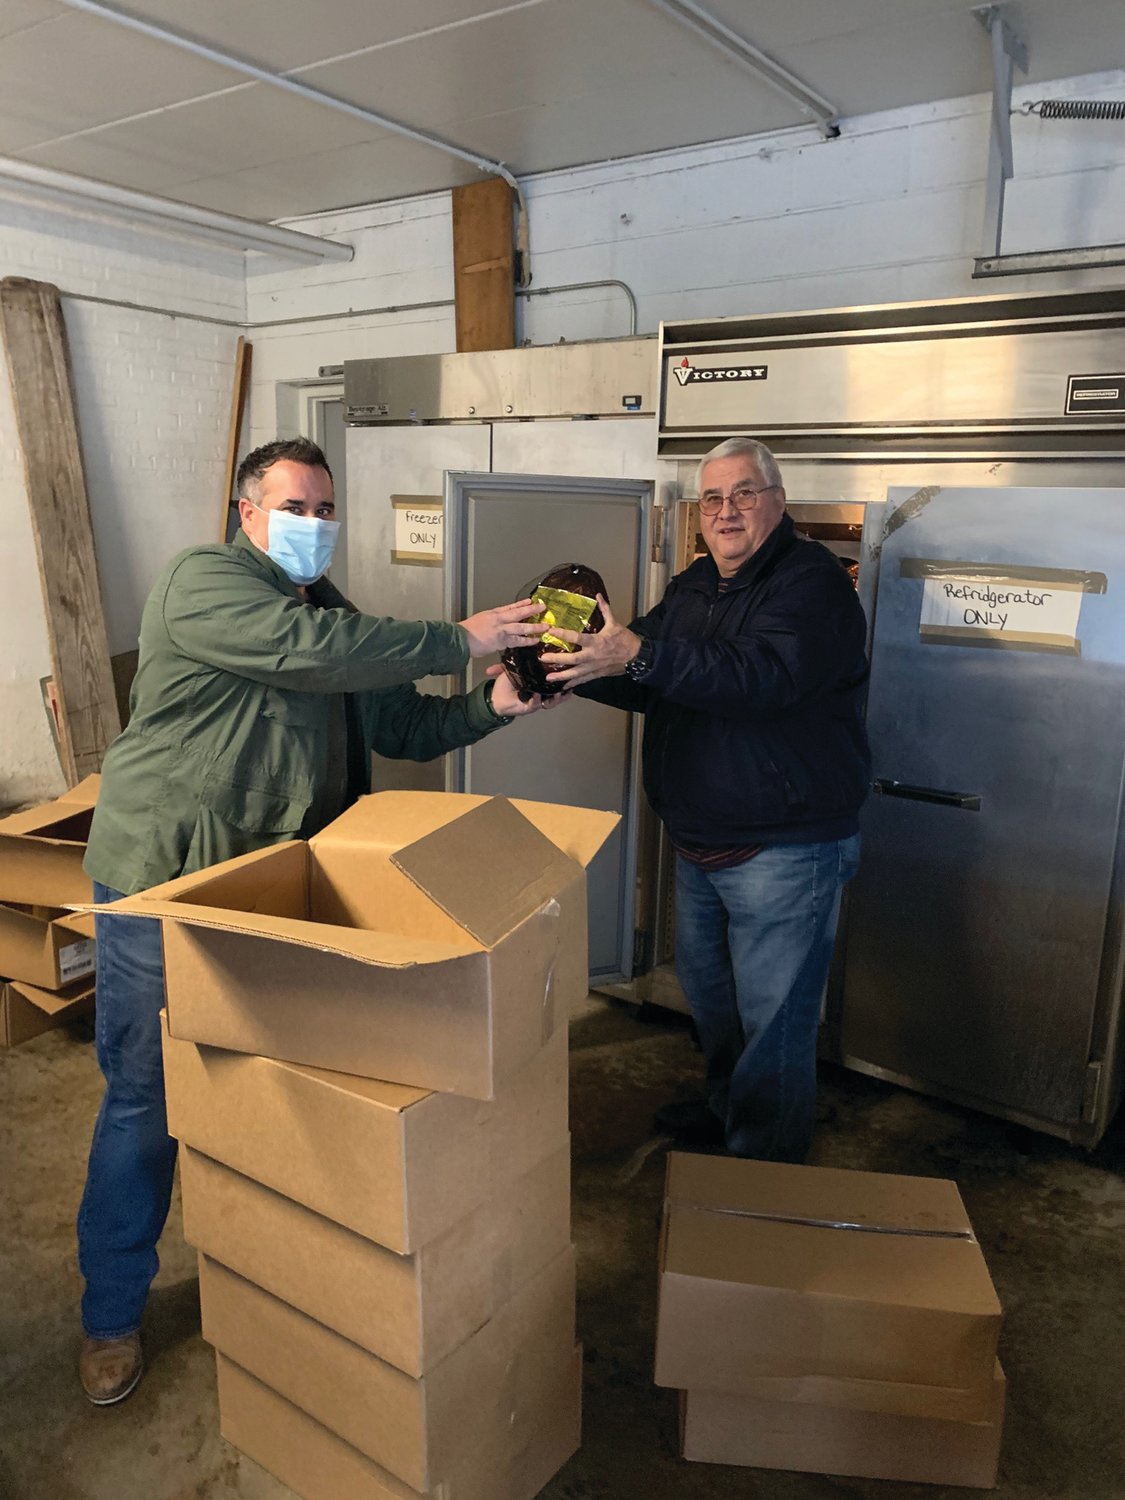 HOLIDAY HAPPENING: Pannese Society Warden Jason Parenteau gives one of 36 hams – as well as three-dozen gift cards – that Our Lady of Grace Church official Joseph Quartino then delivered to different families in need for Christmas.